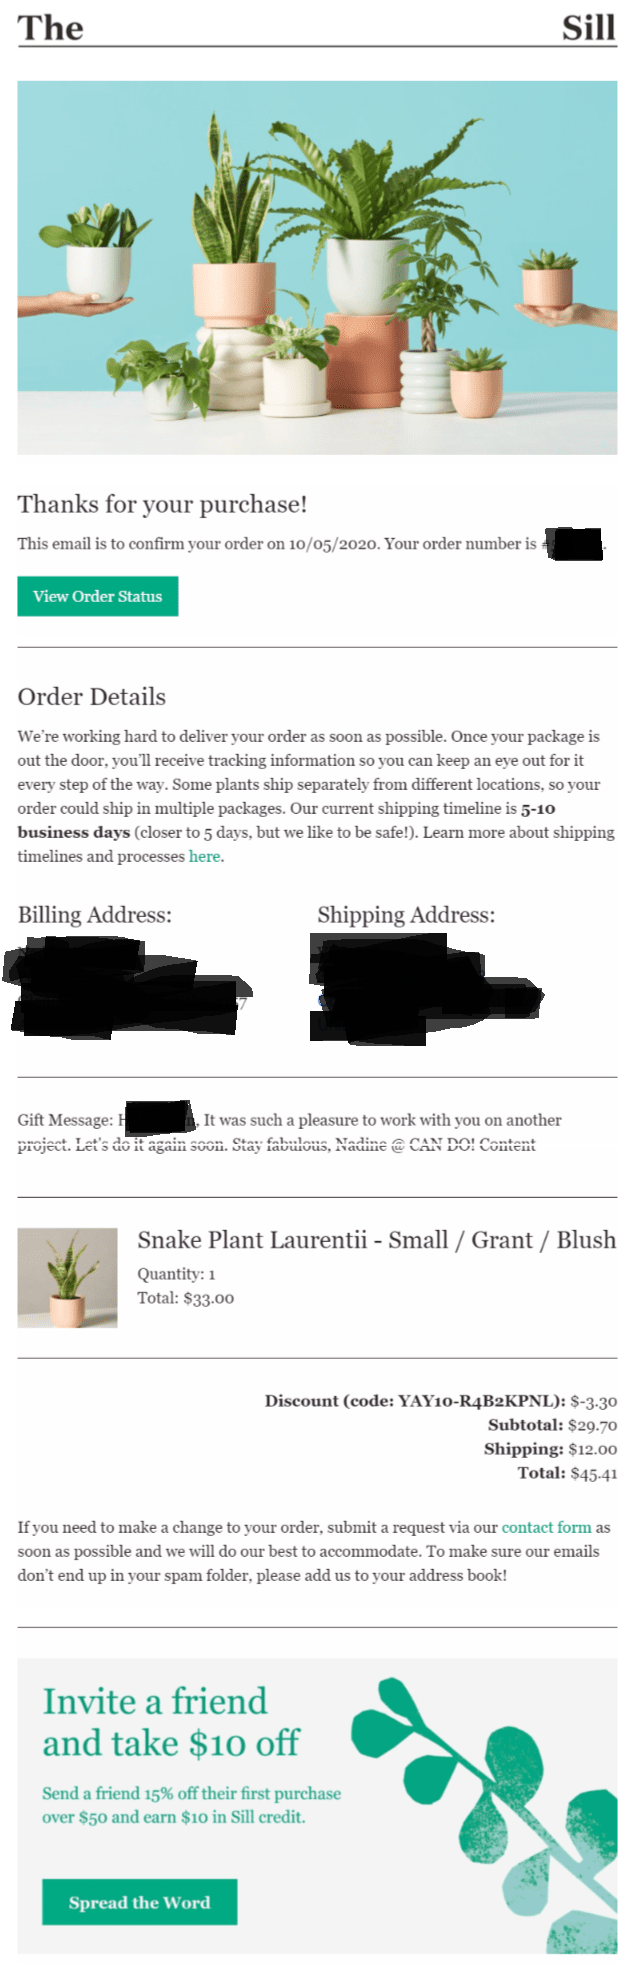 US indoor plant delivery service The Sill can teach us a thing or two about email marketing and customer delight